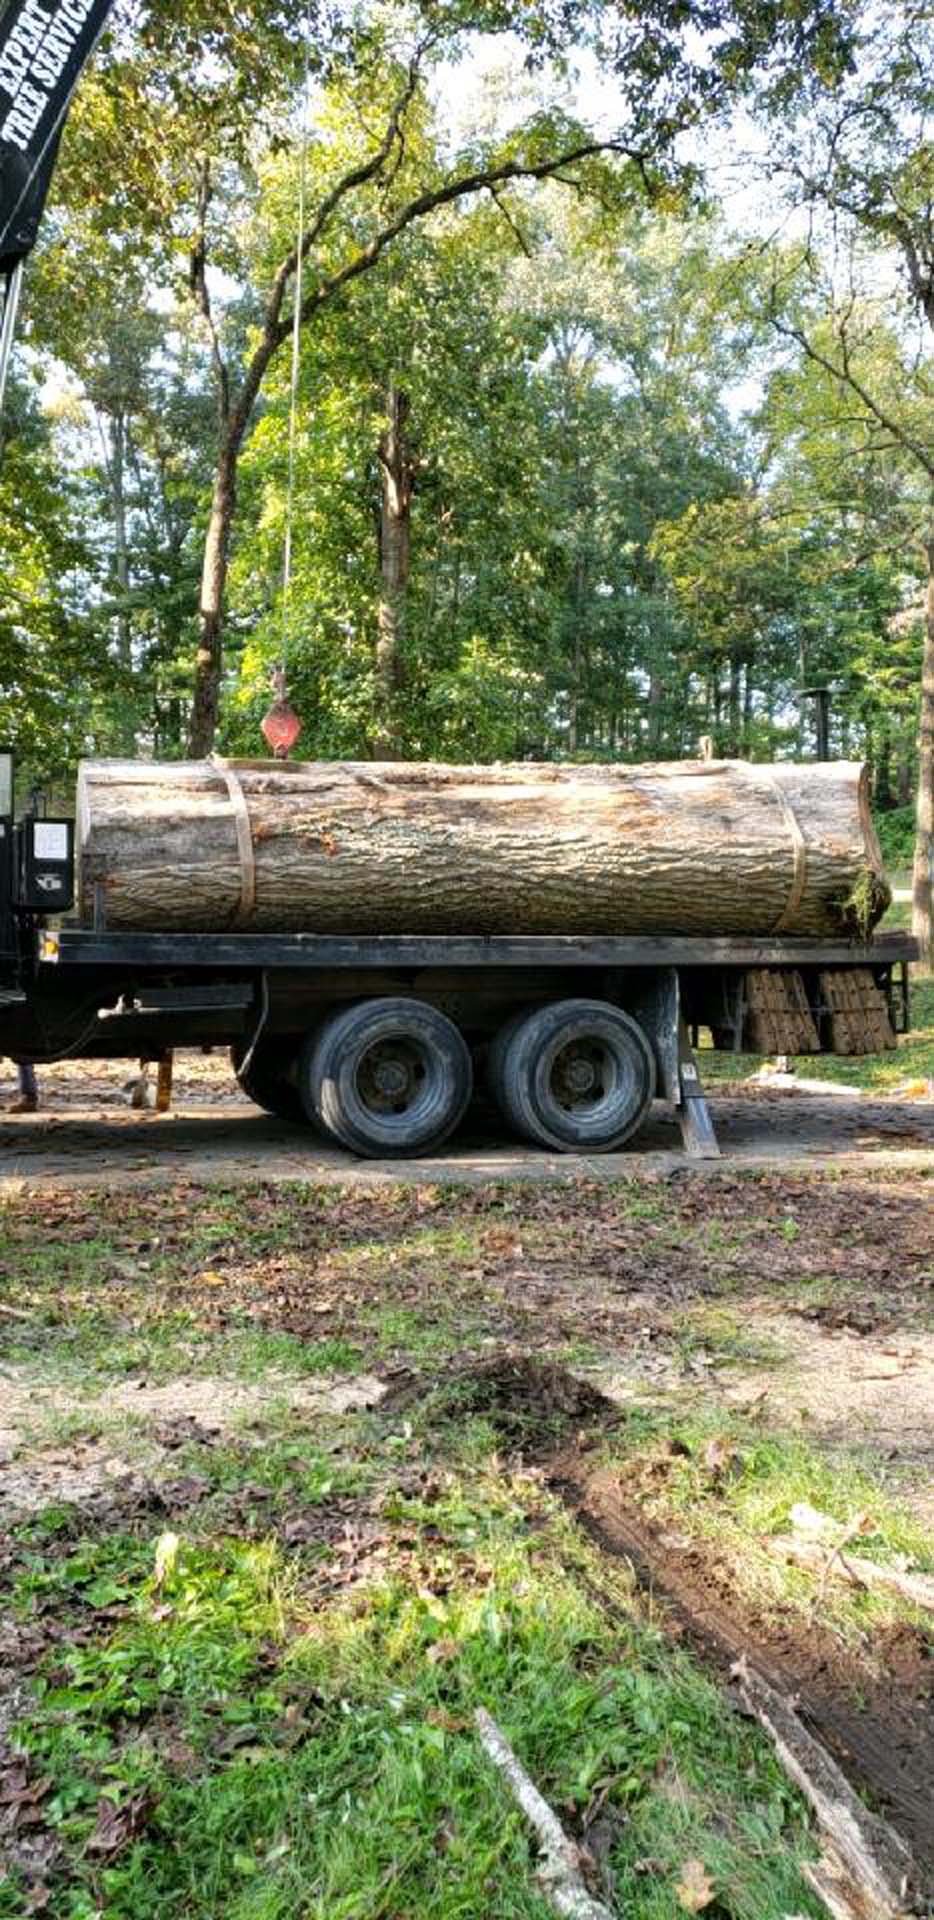 Tree Trunks On A Flat Bed Truck